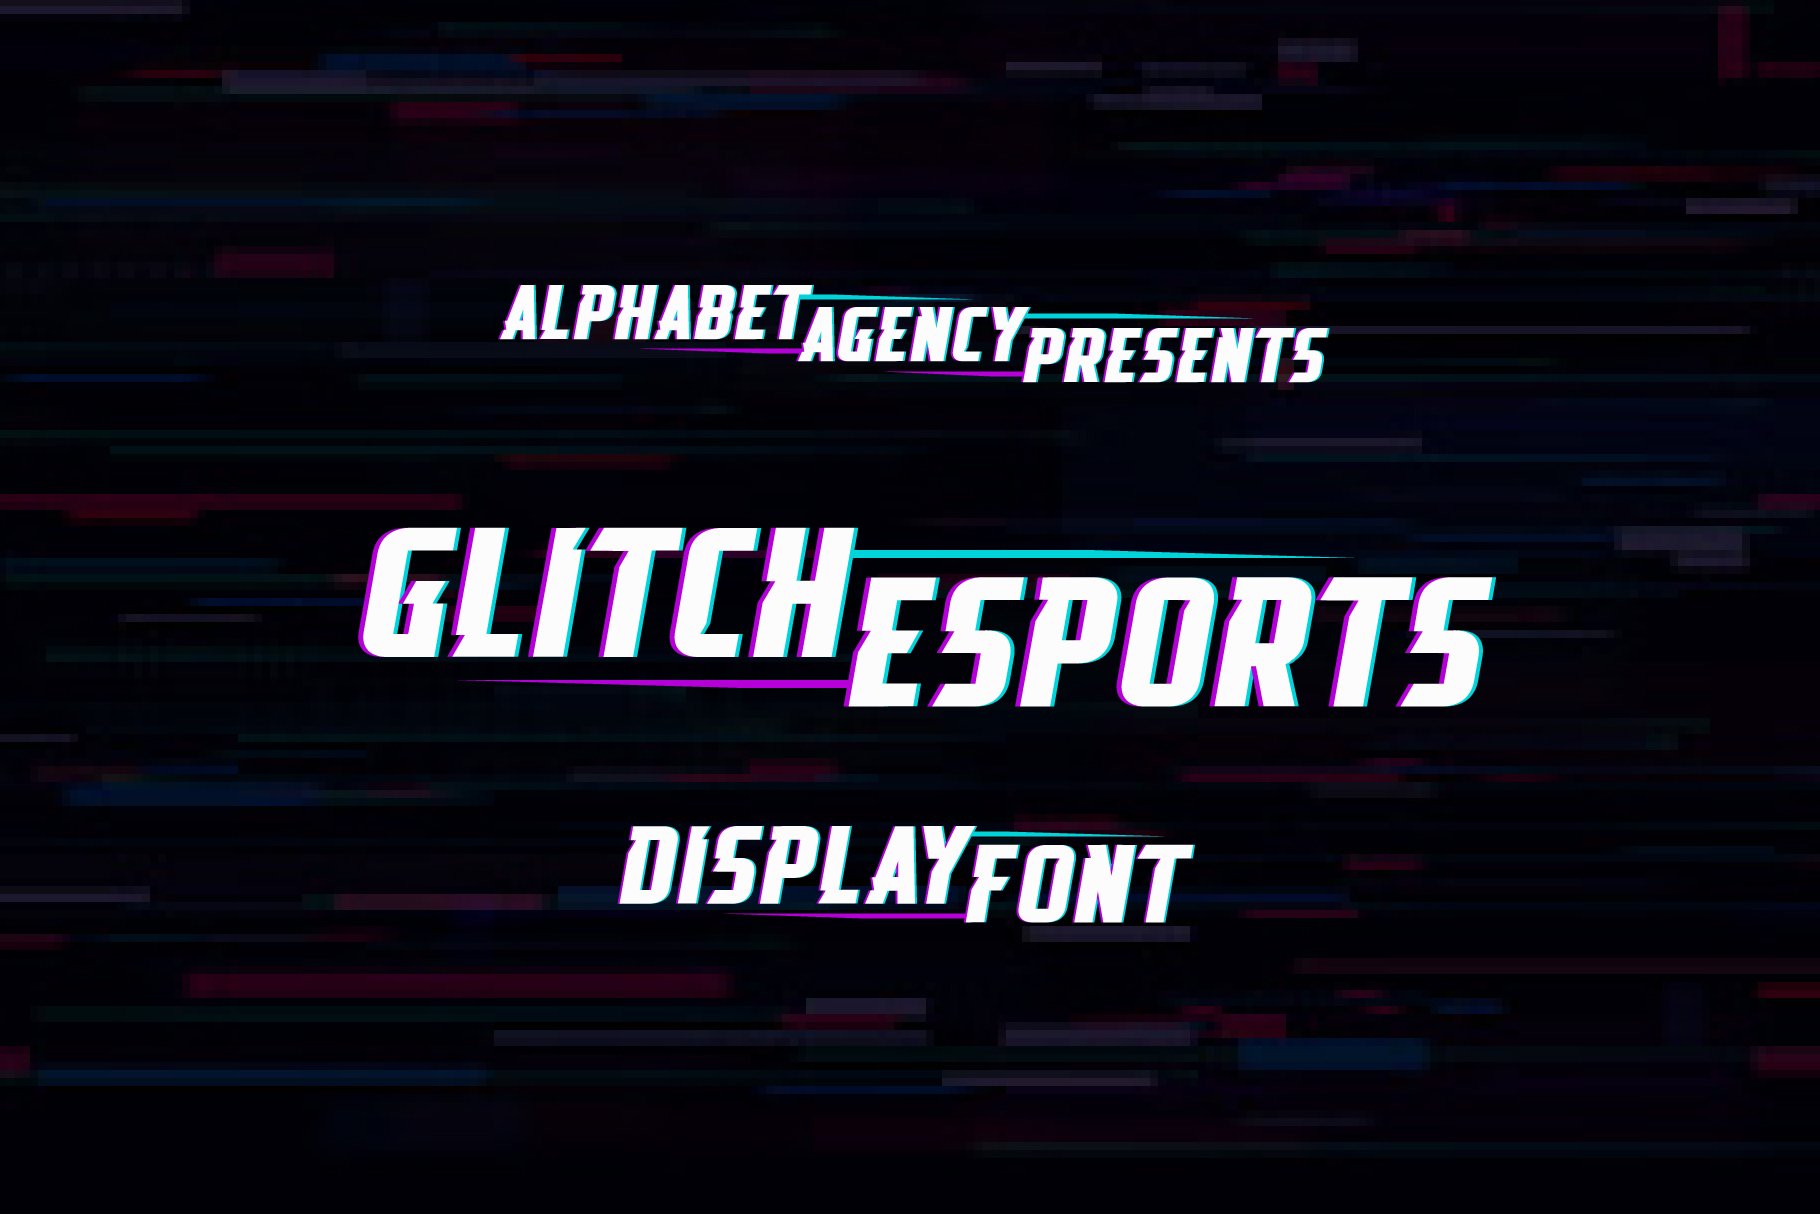 GLITCH ESPORTS DISPLAY FONT cover image.